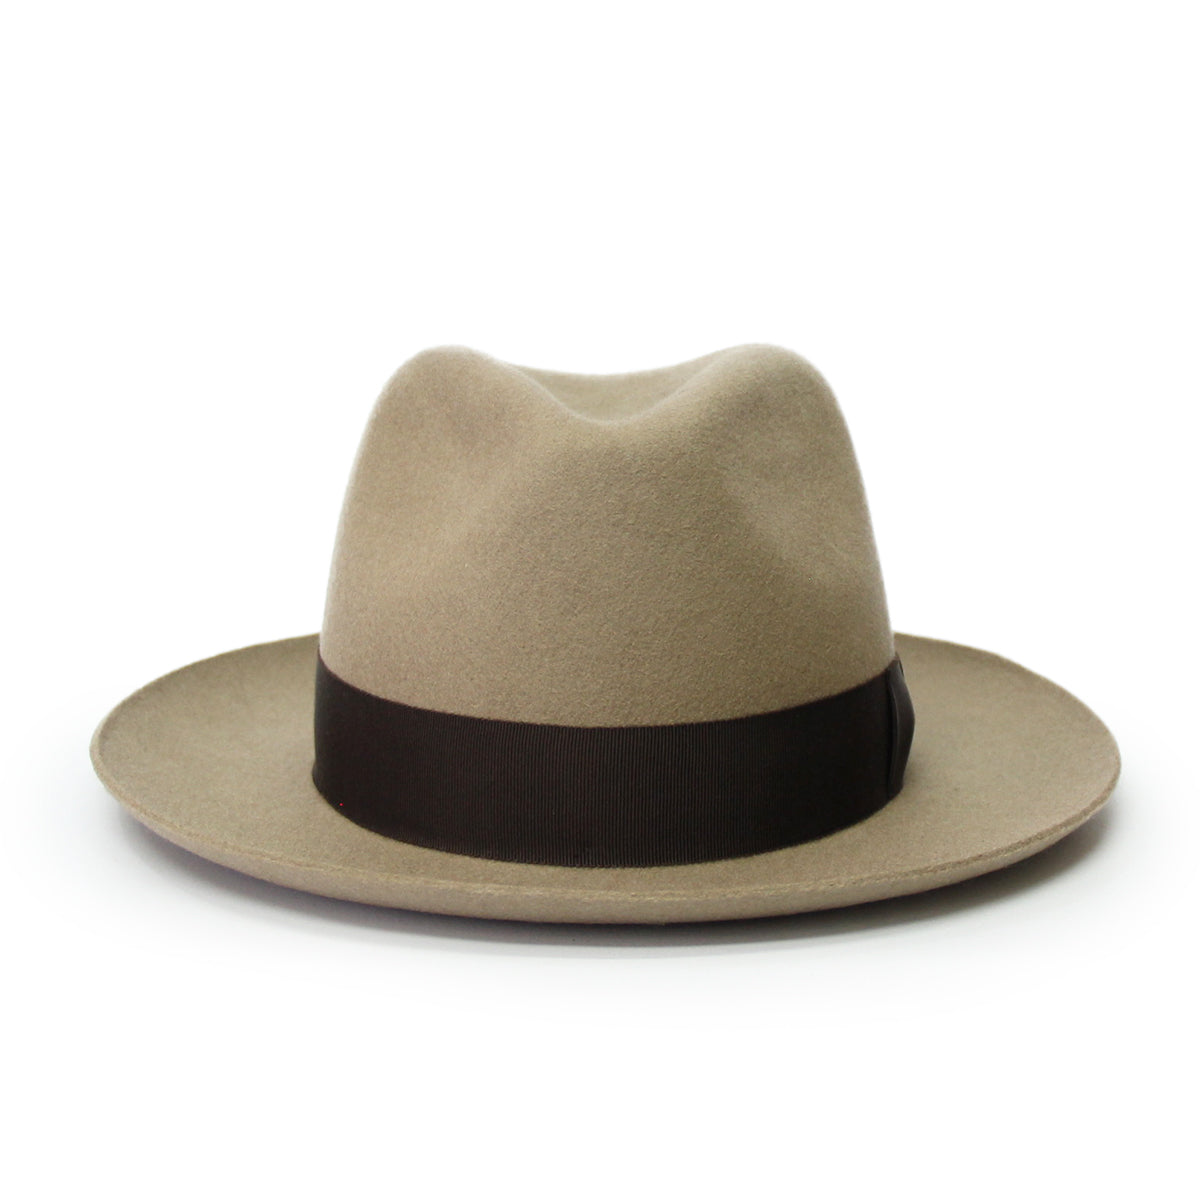 Standard Fedora with paisley Liner